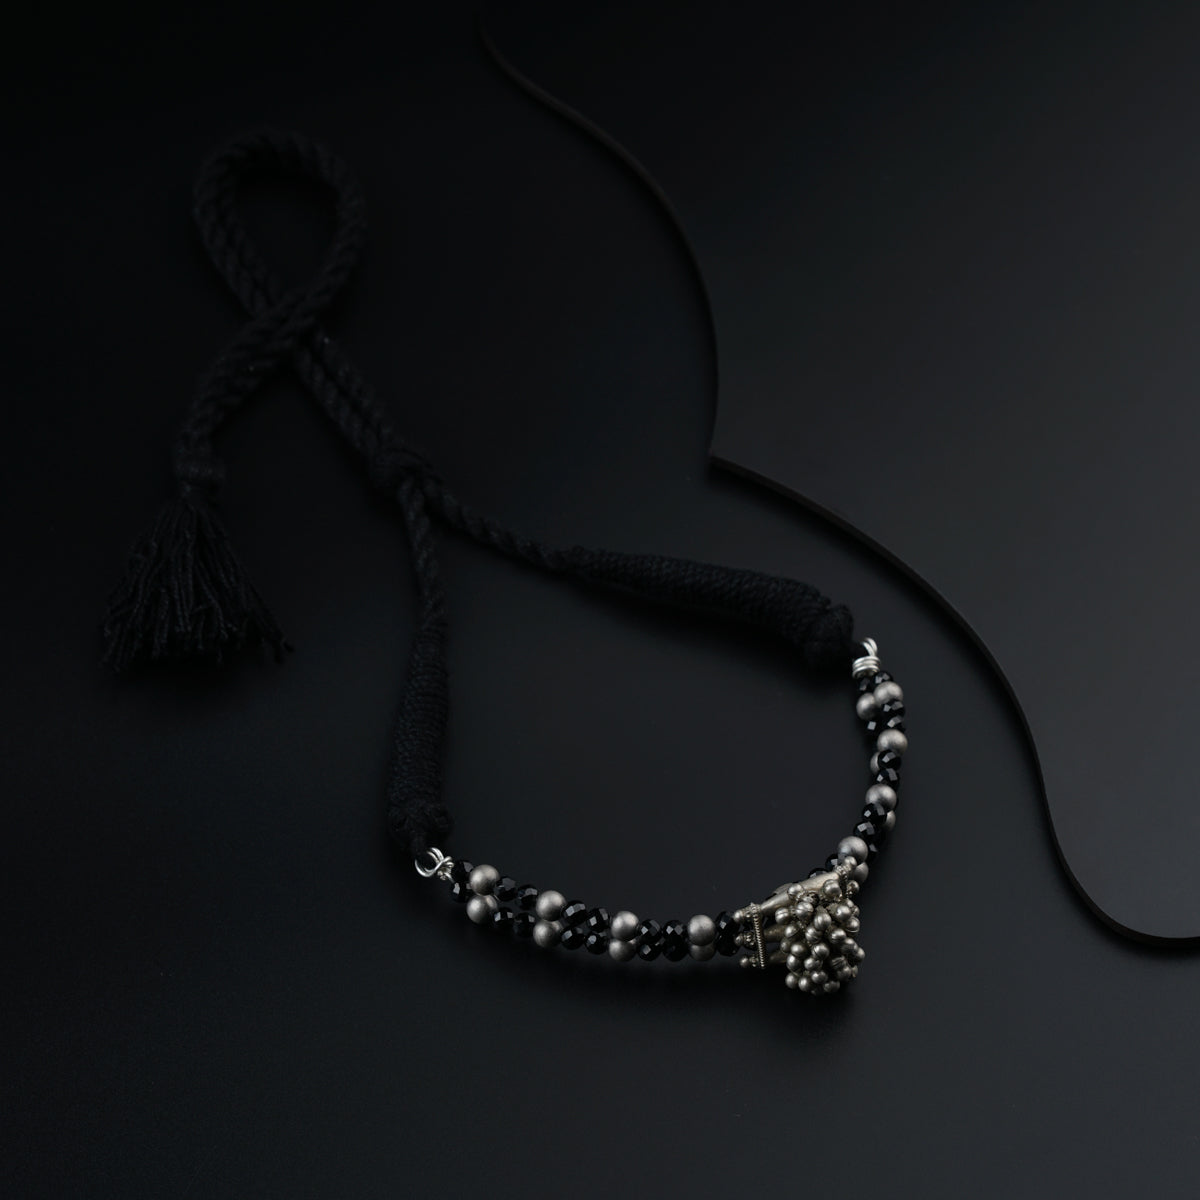 Antique Silver Choker with Black Spinel and Silver Beads